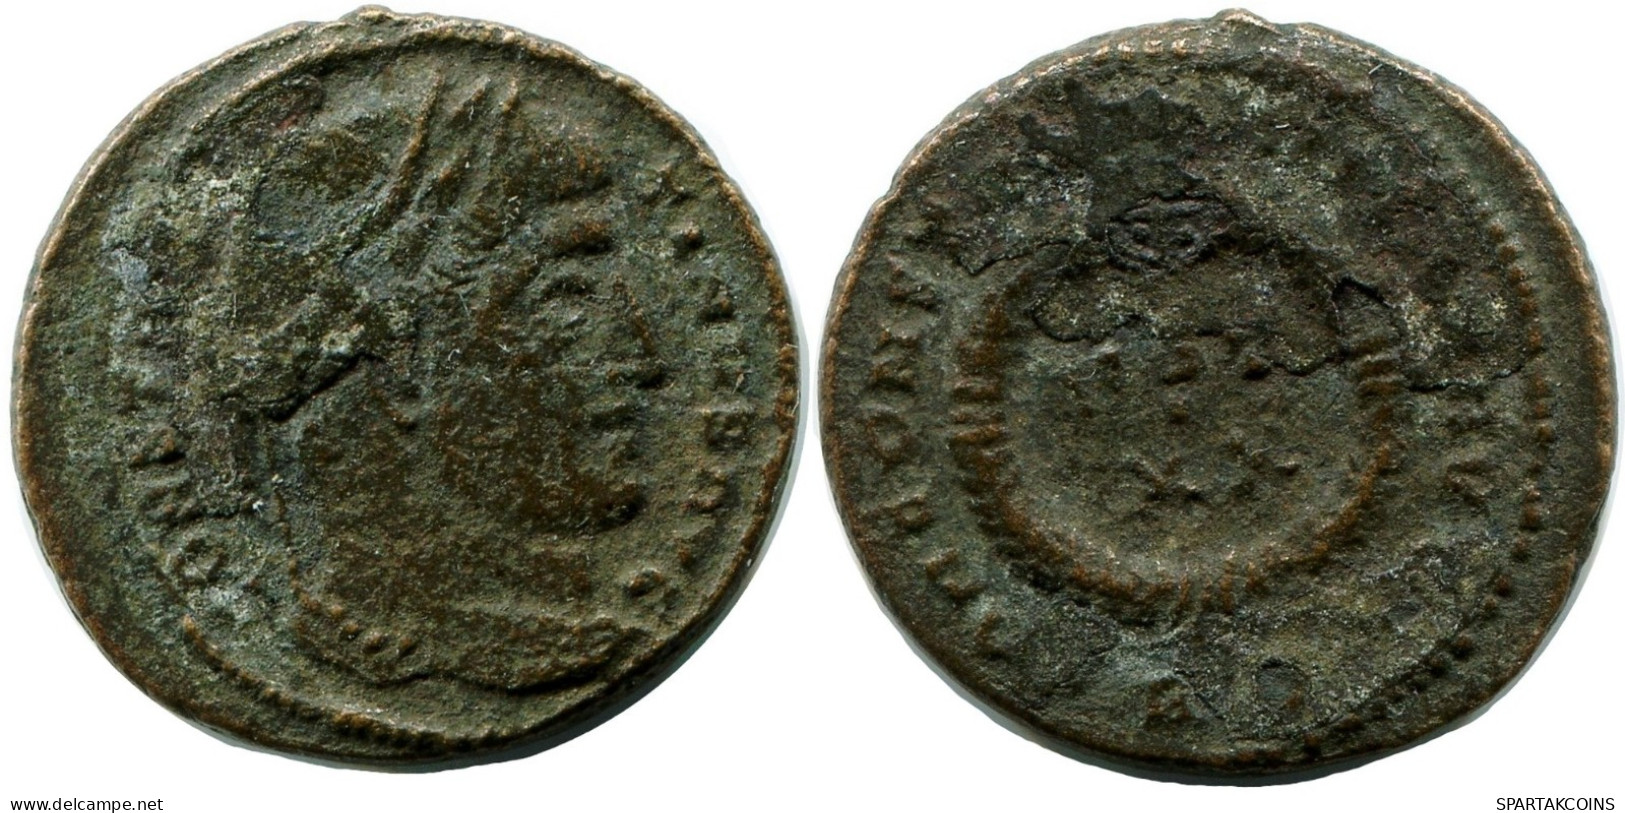 CONSTANTINE I MINTED IN ROME ITALY FOUND IN IHNASYAH HOARD EGYPT #ANC11166.14.E.A - El Imperio Christiano (307 / 363)